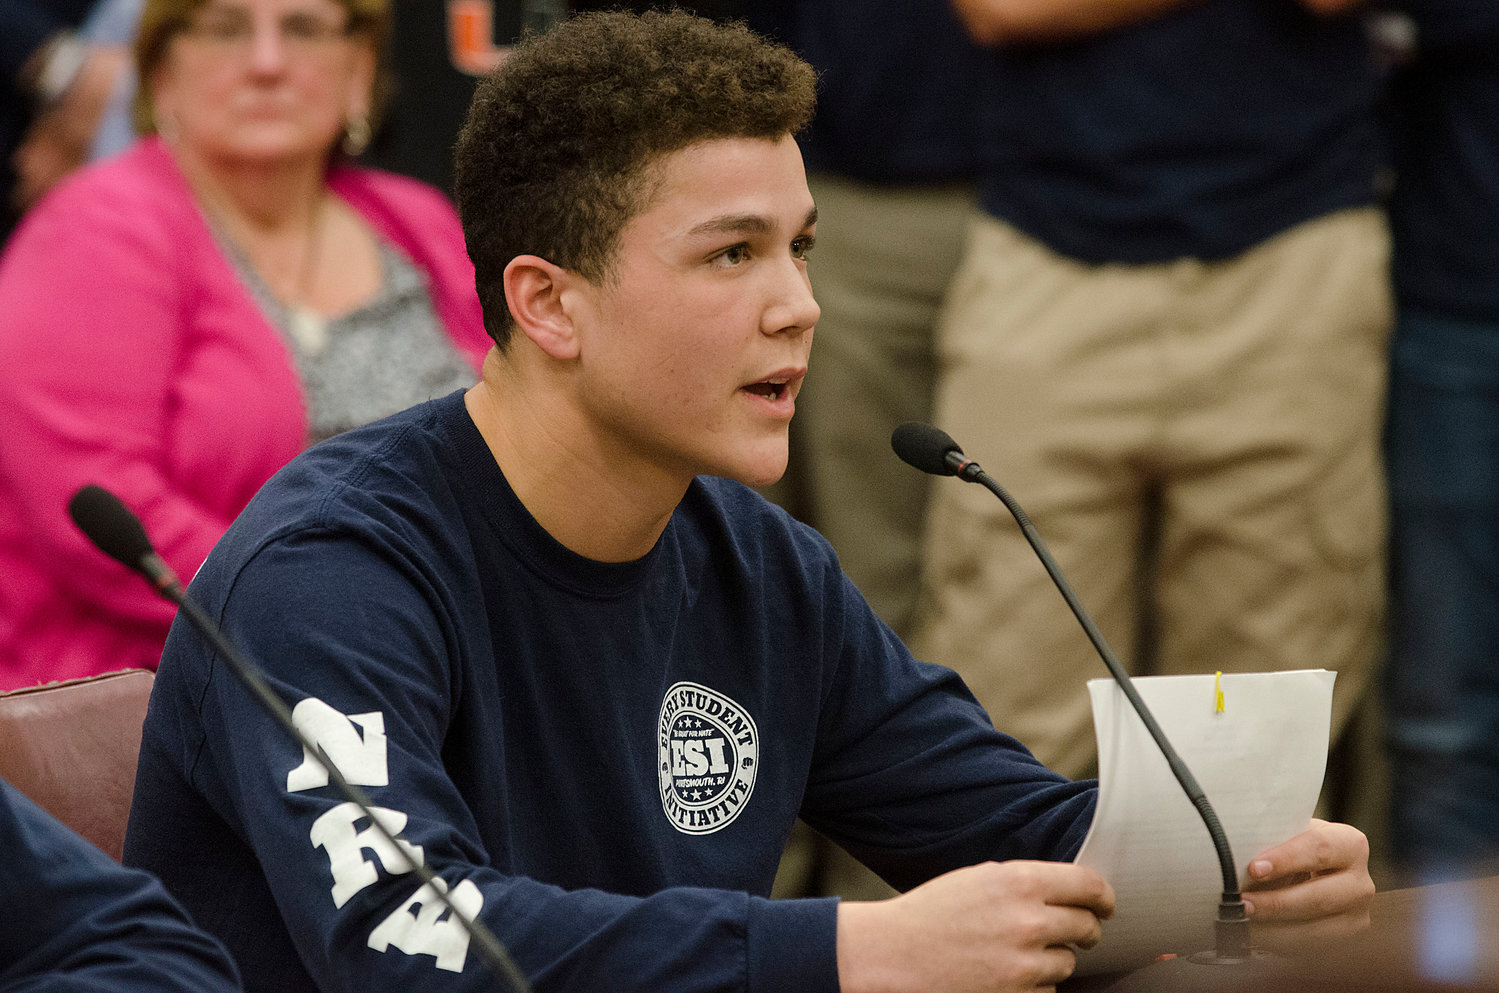 Marcus Evans, a PHS freshman and member of Every Student Initiative, testifies in support of the bill.